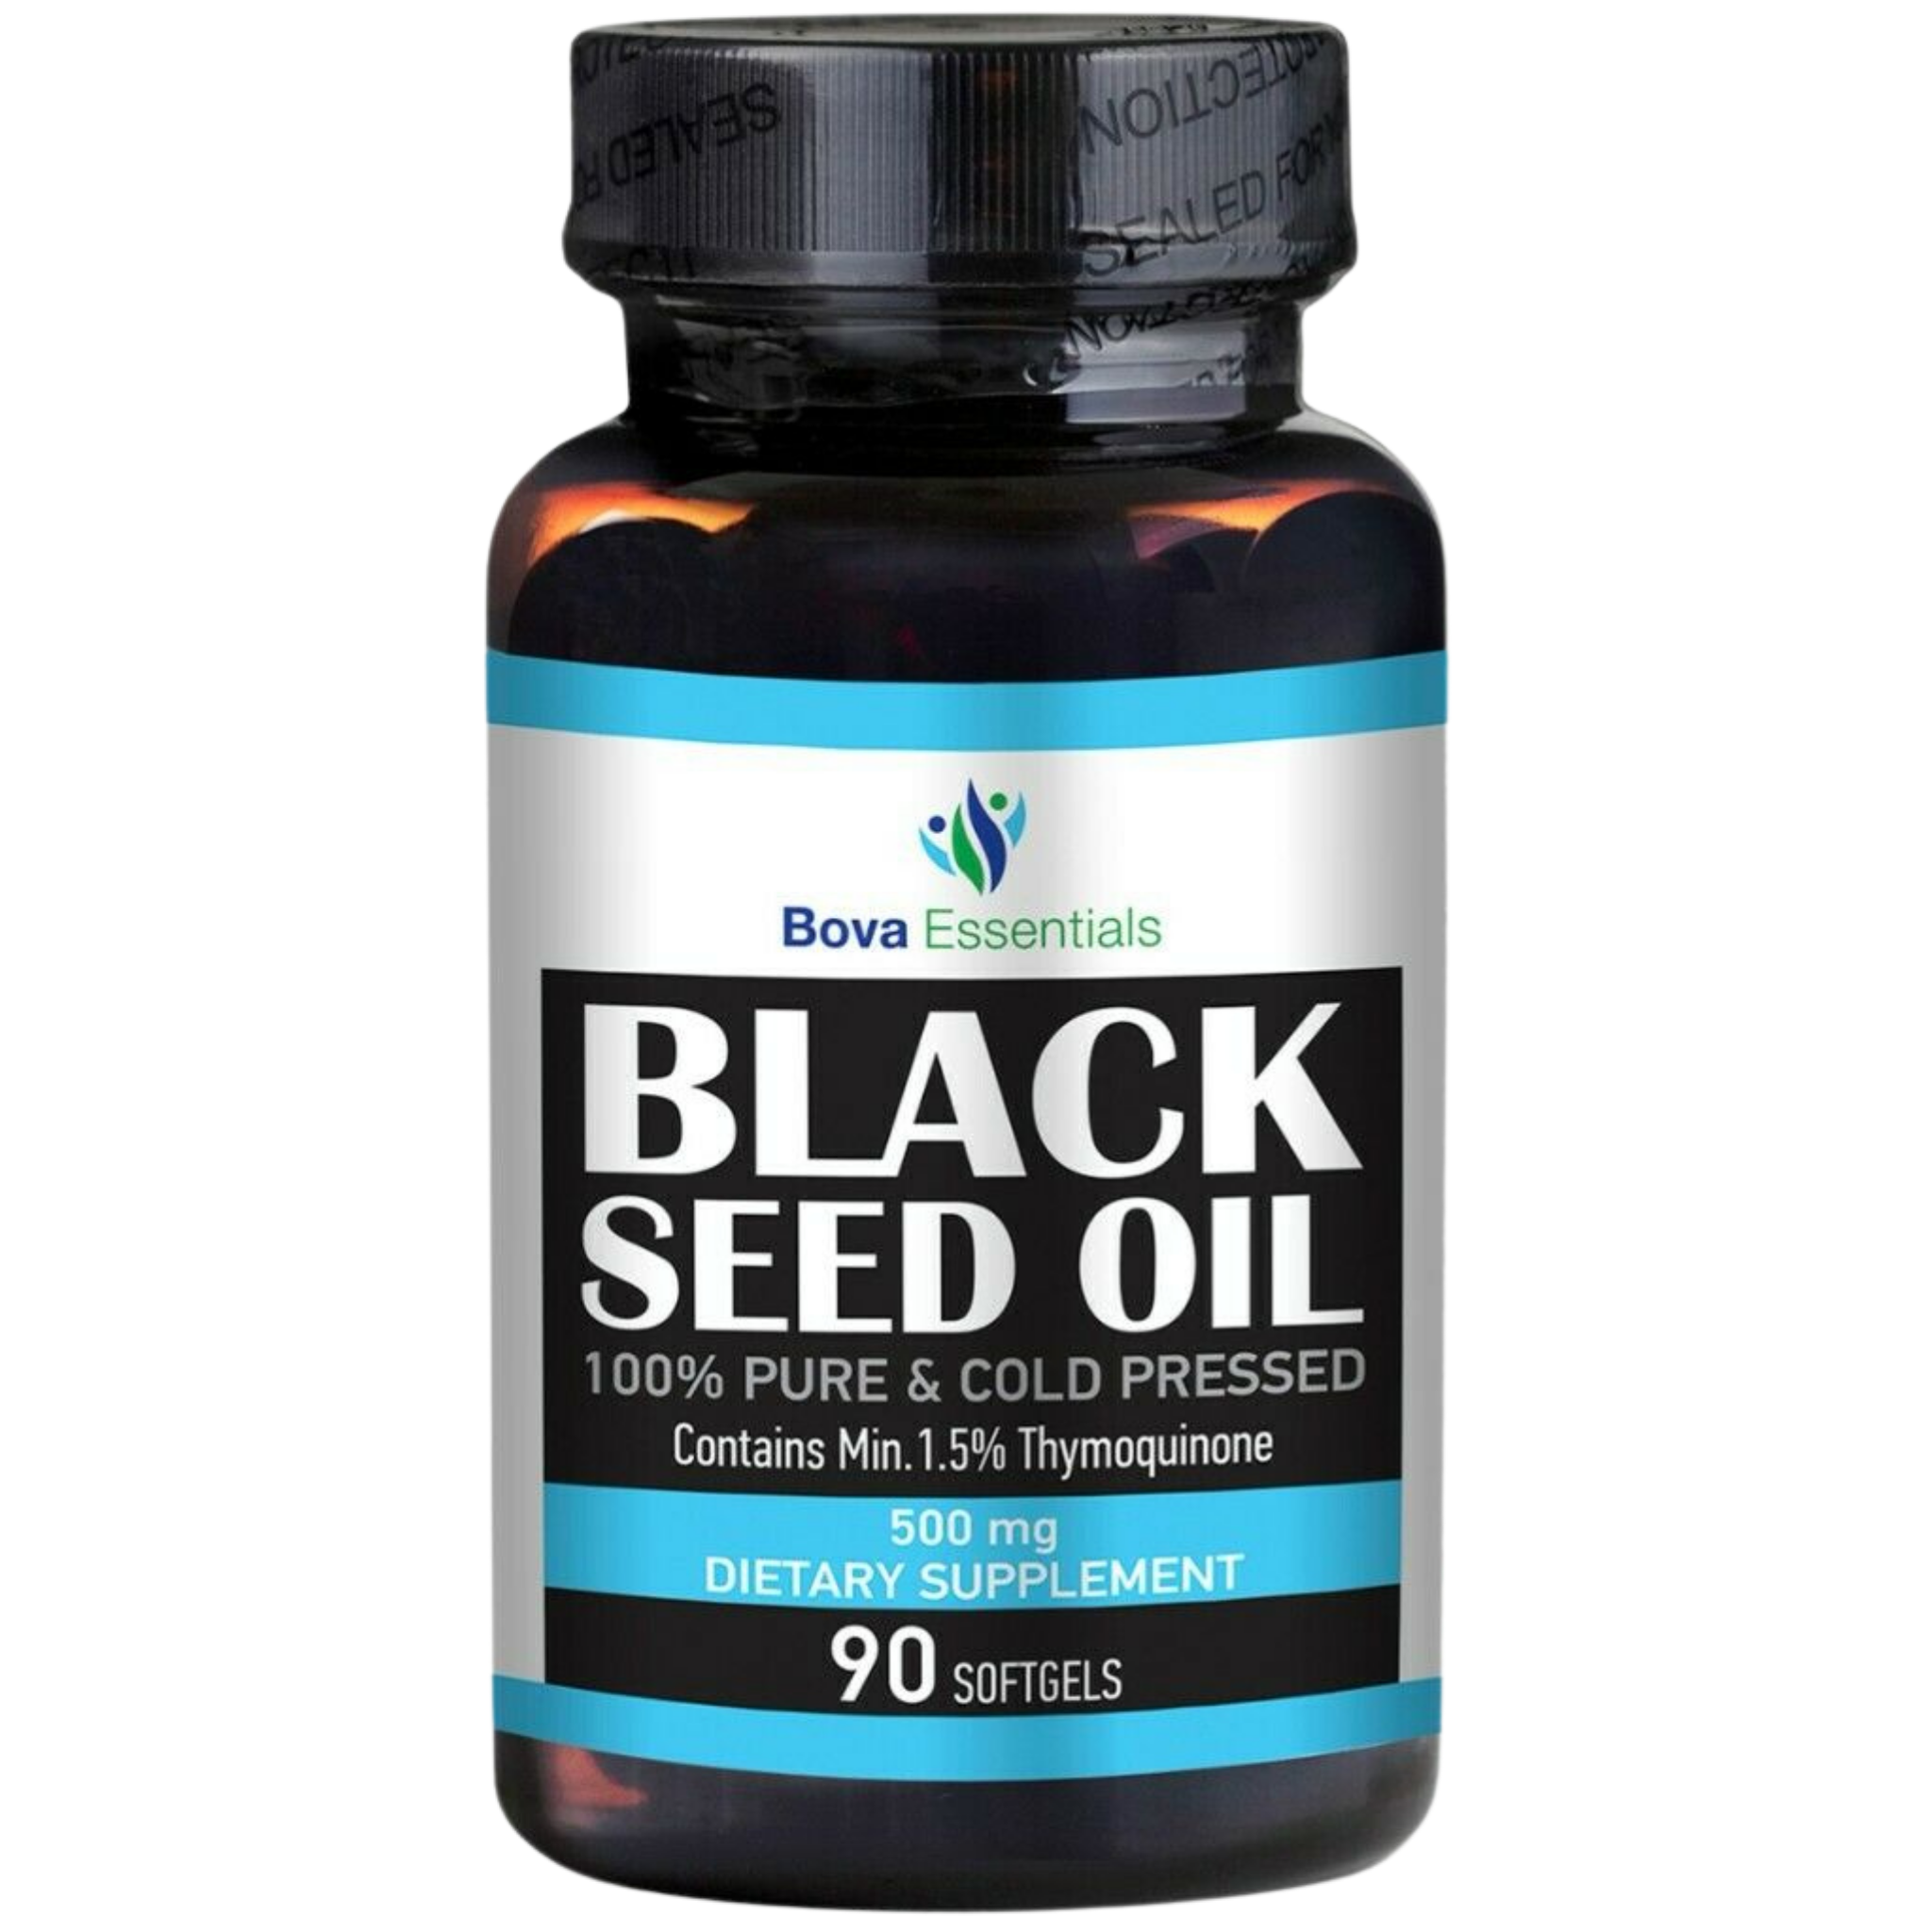 Black Seed Oil Capsules 500mg, 90 Count Softgel - 100% Pure Natural ...